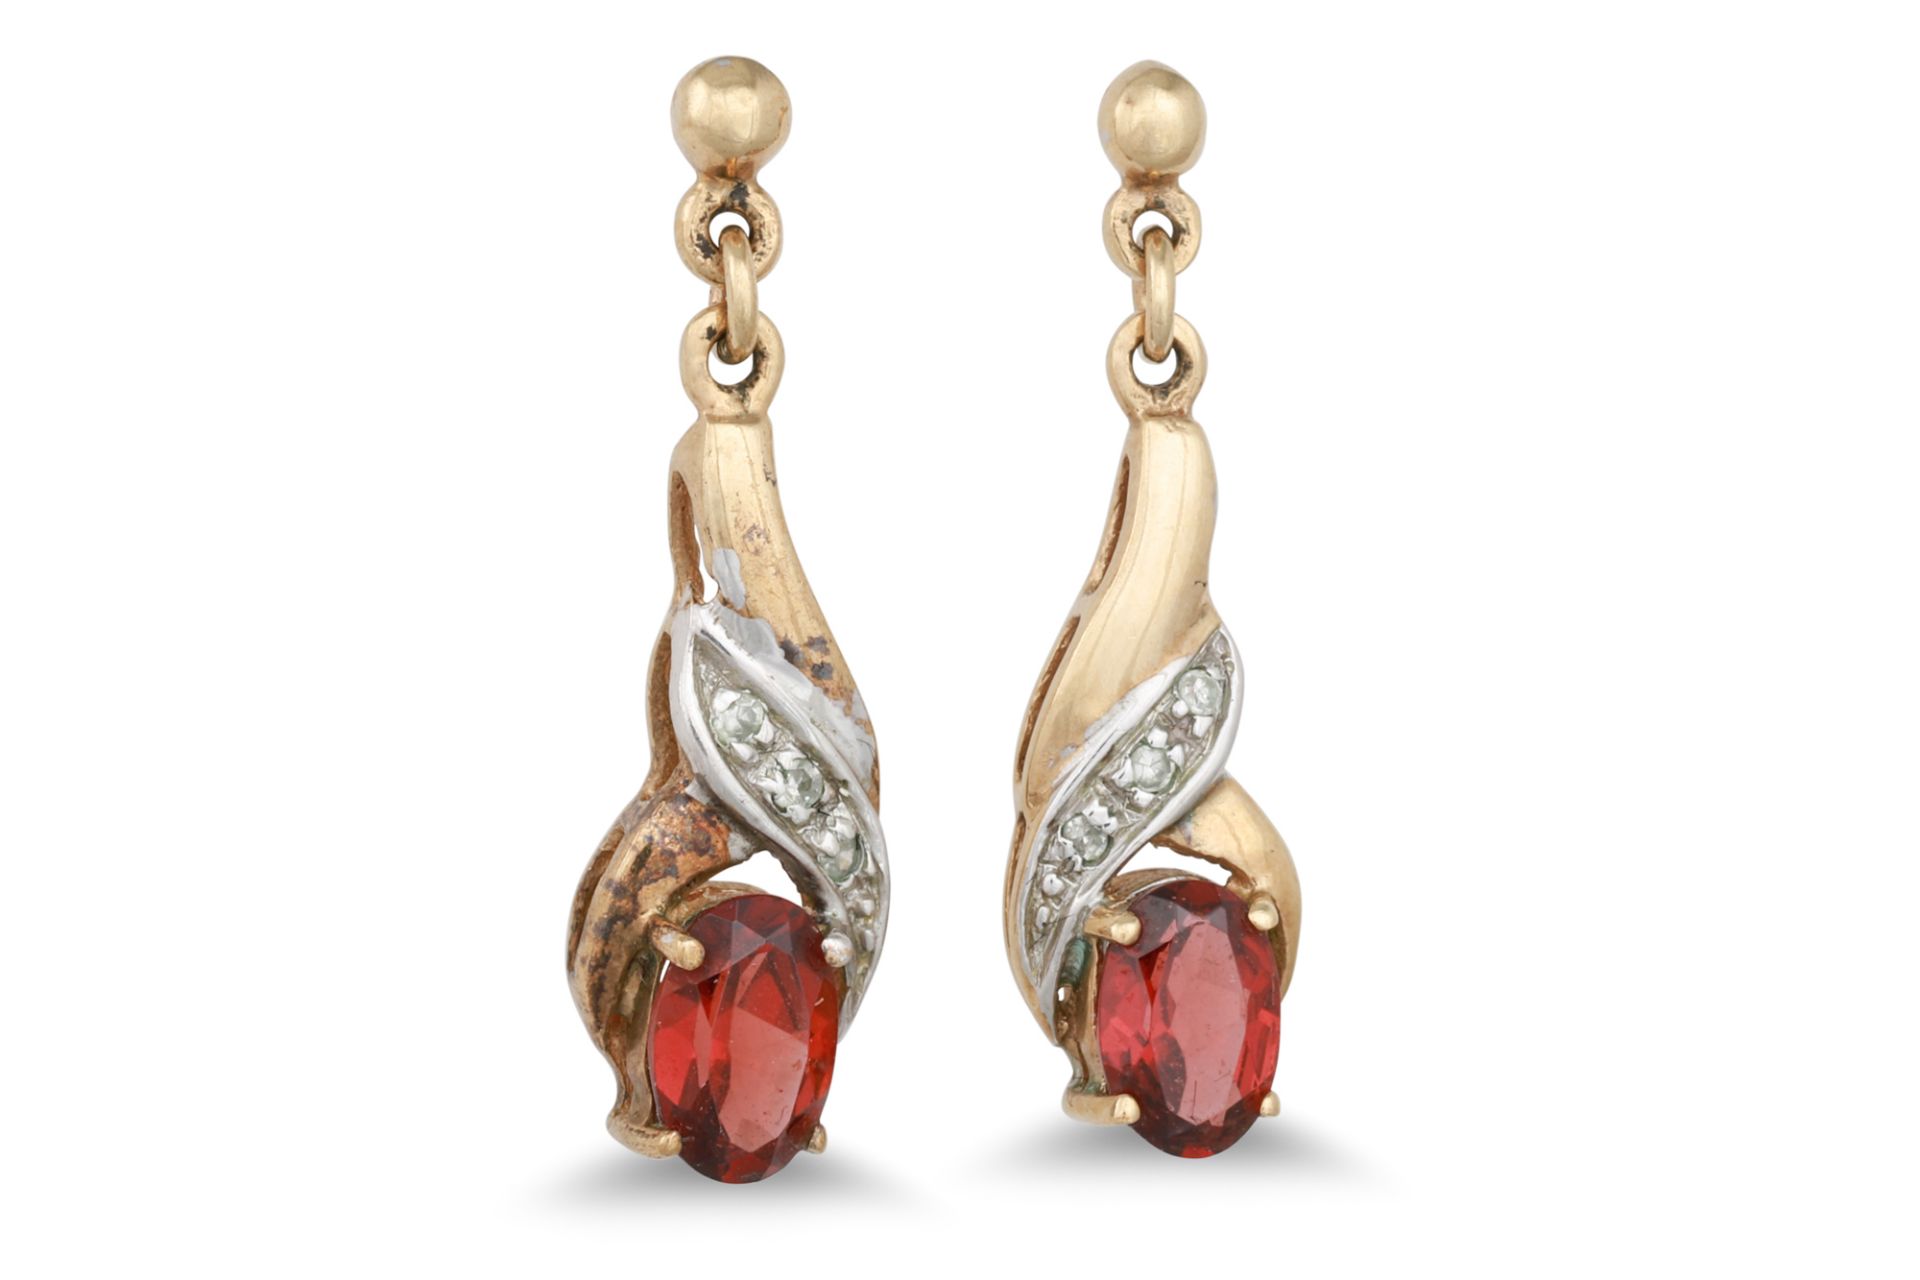 A PAIR OF DIAMOND AND GARNET DROP EARRINGS, mounted in yellow gold